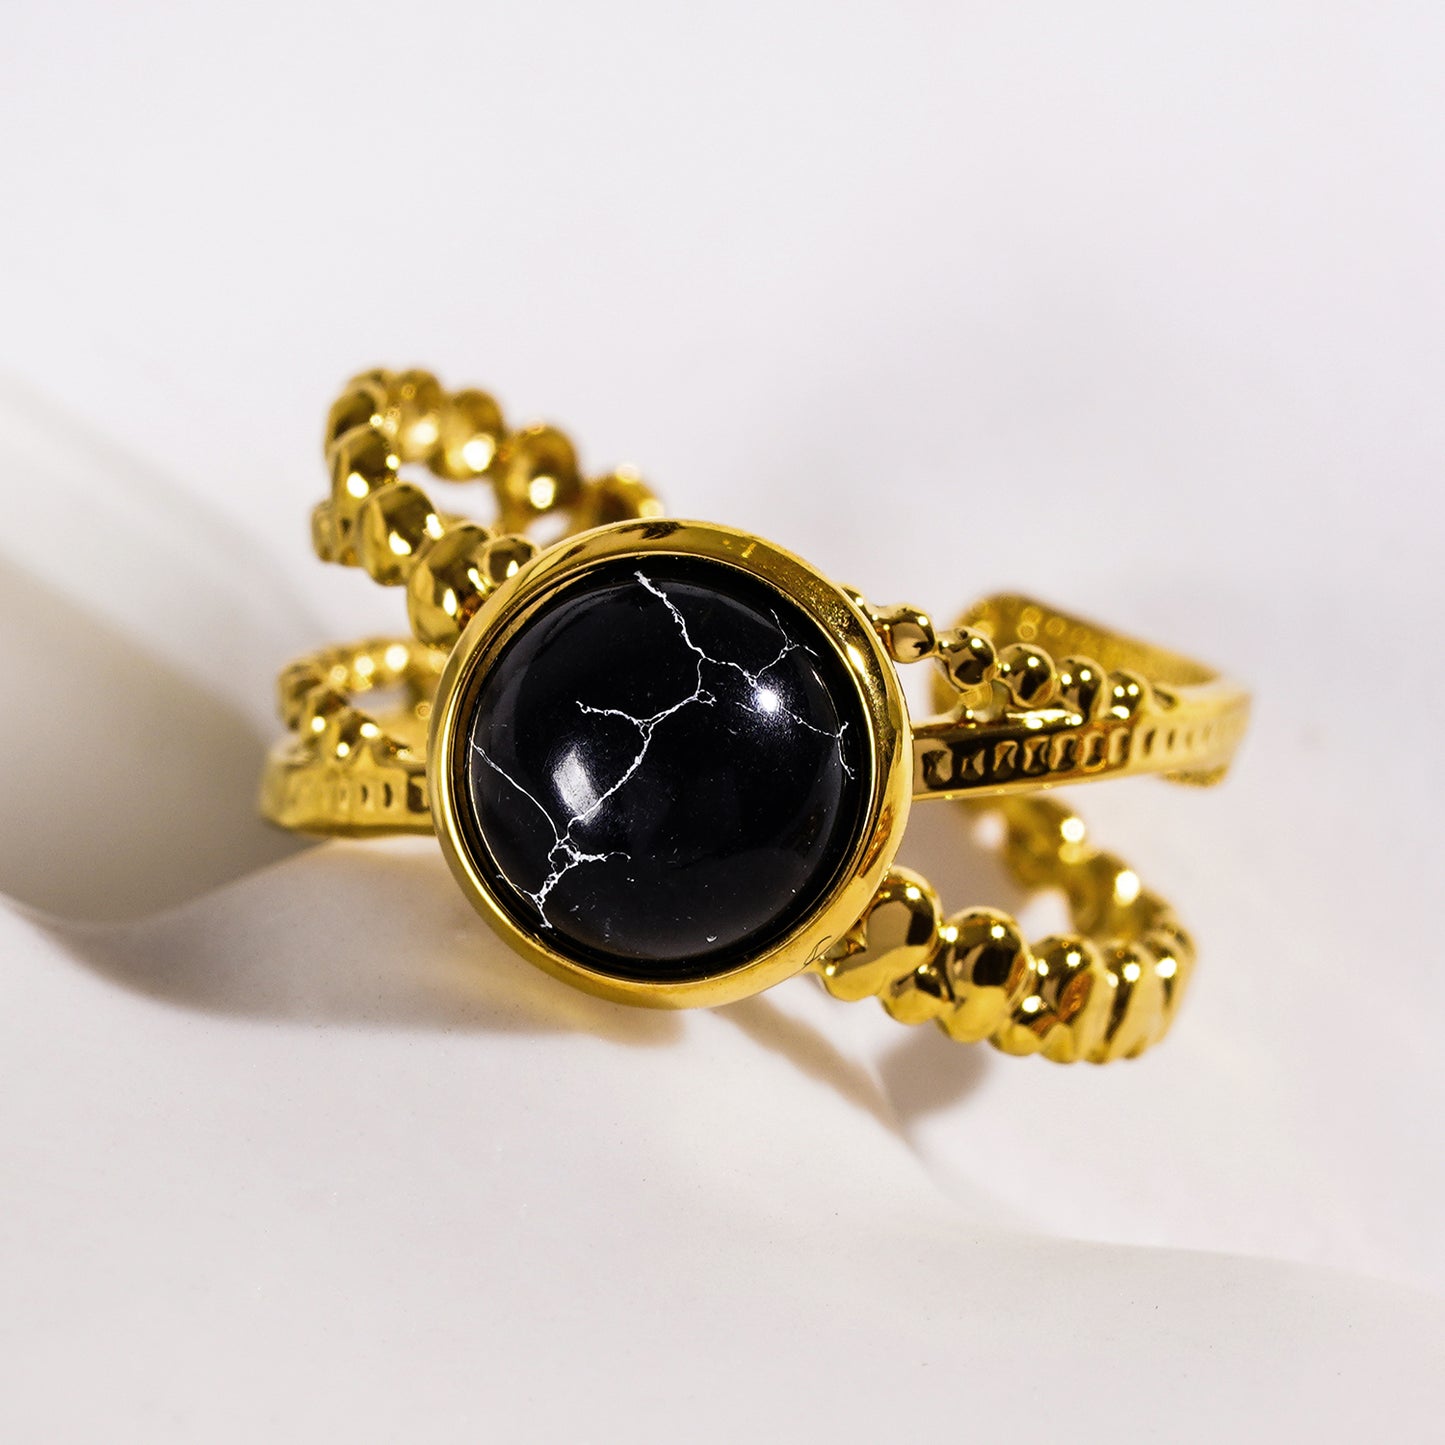 Style MALAYA 0111: Cross Over Stacked Ring with a Black Turquoise Stone Centrepiece.